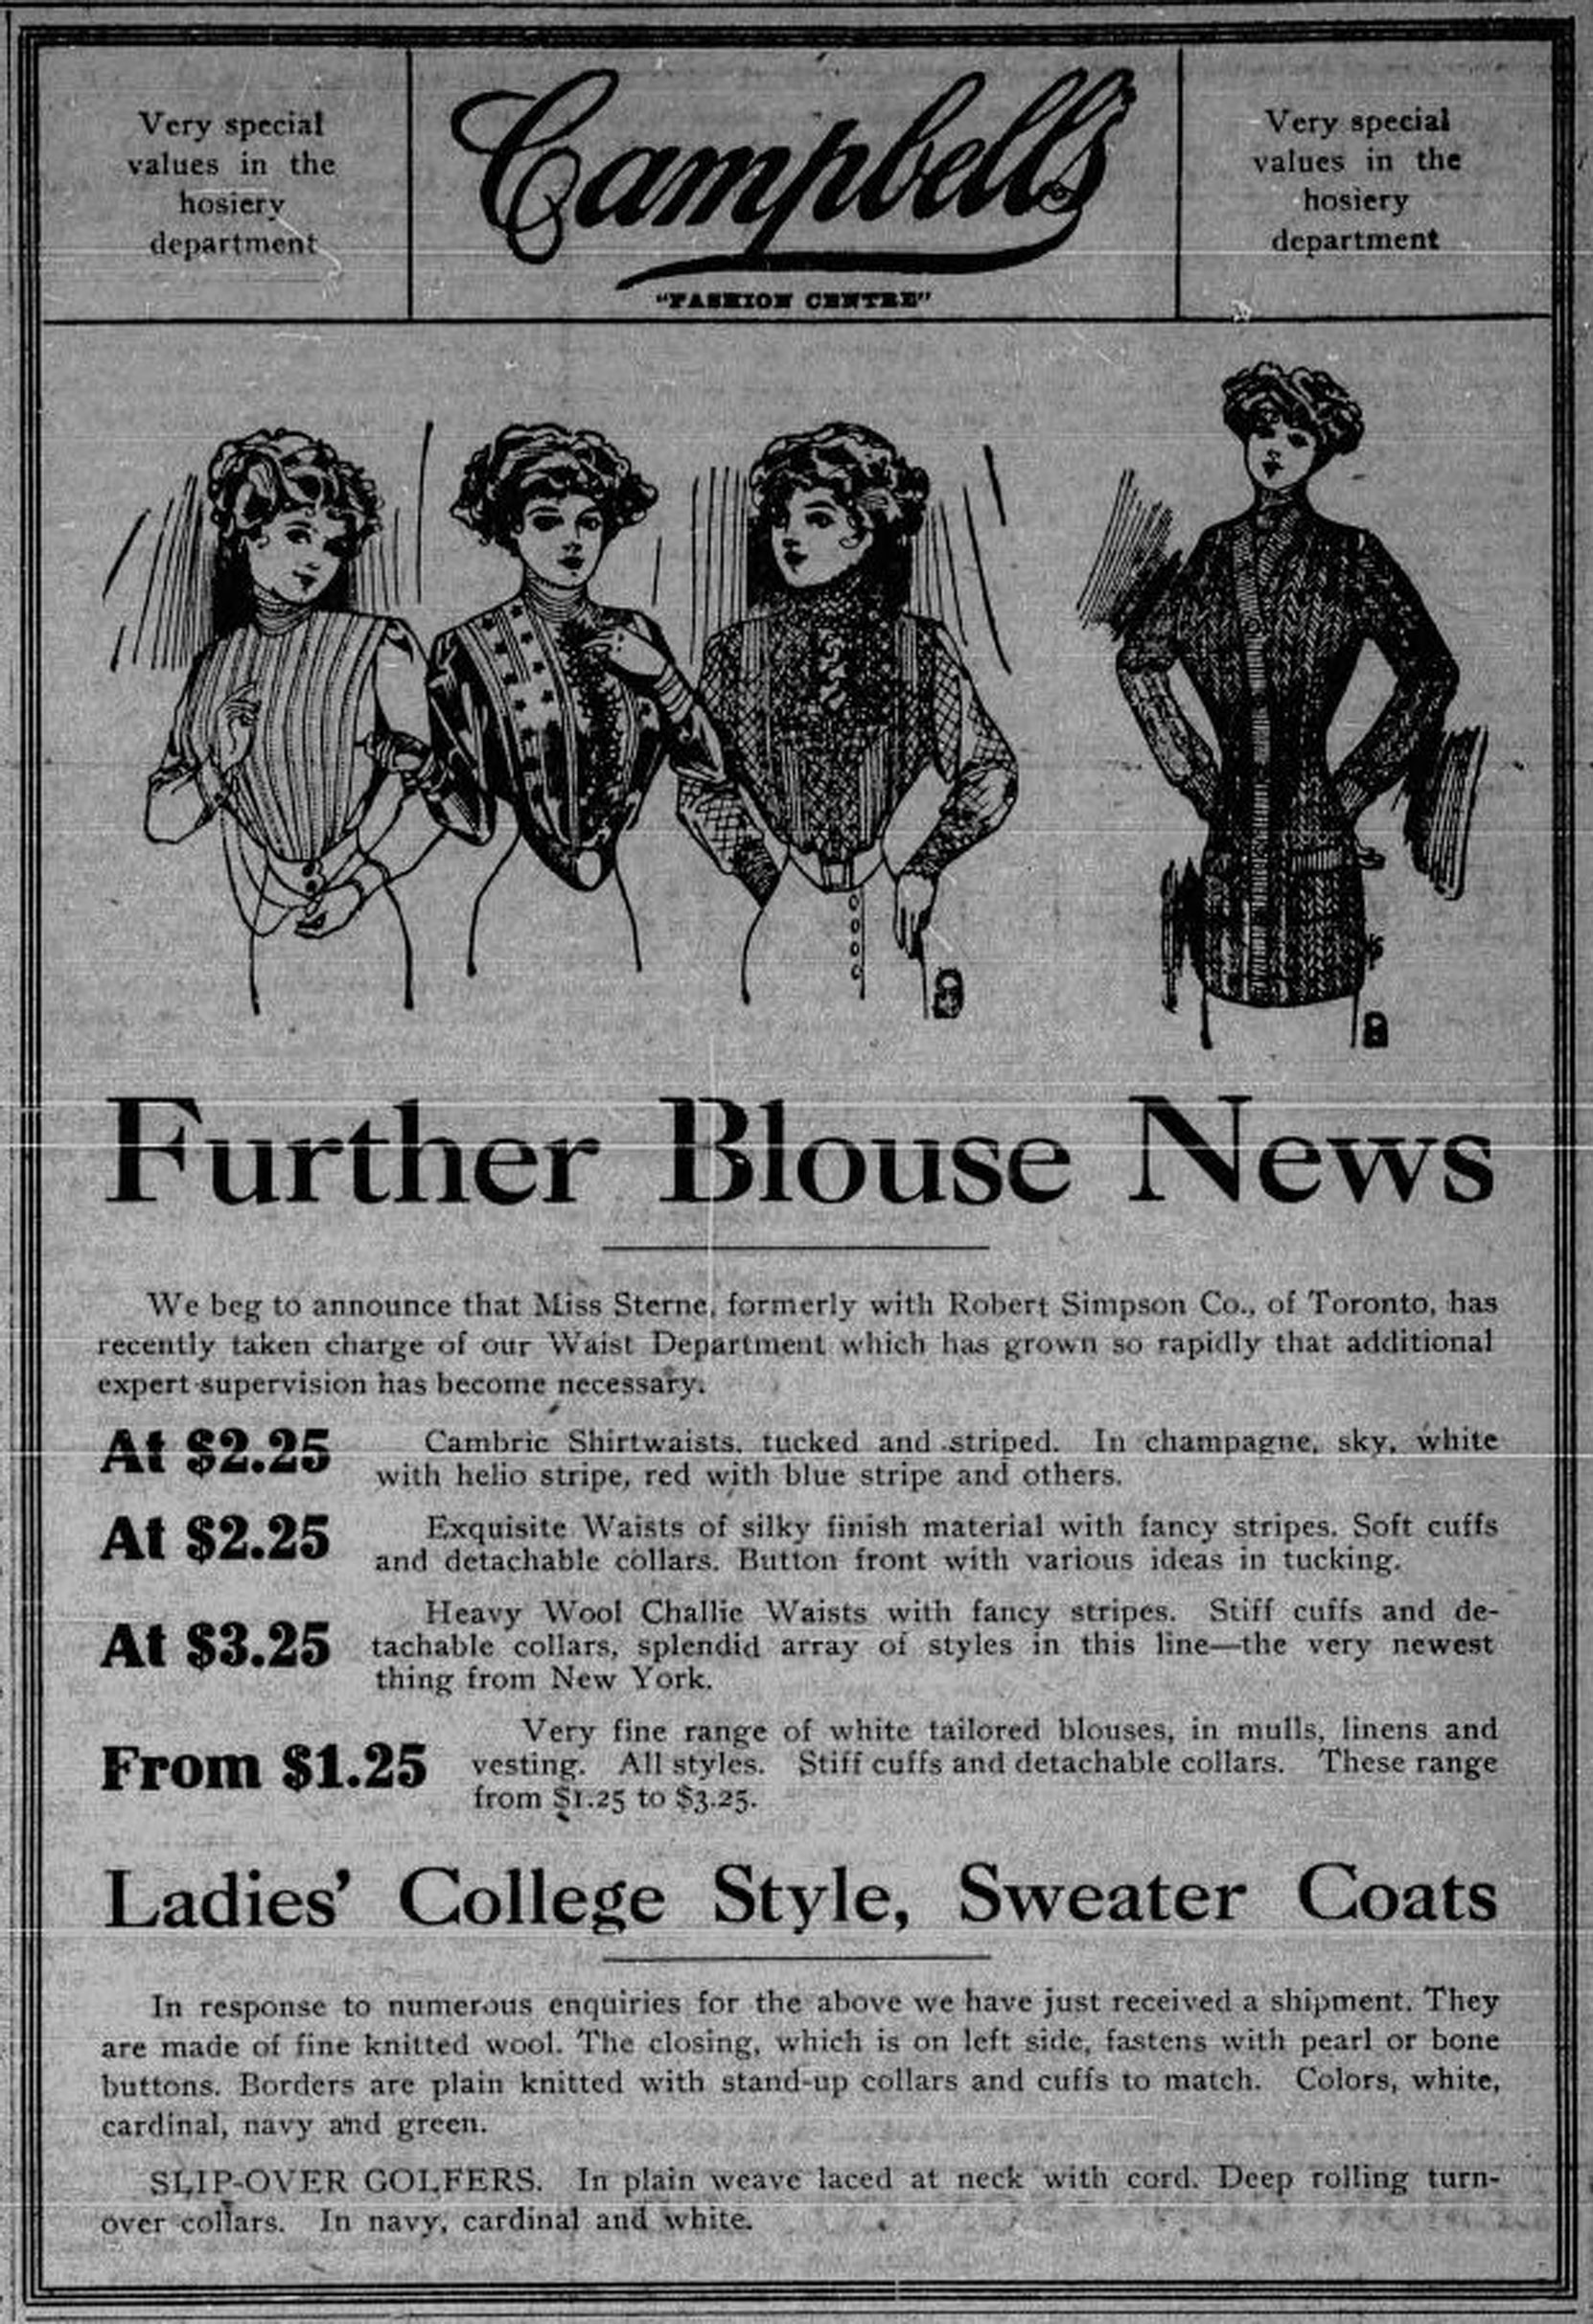 1911 advertisement for Angus Campbell, a women's clothing store located at 1010 Government Street for several decades. (Victoria Online Sightseeing Tours collection)